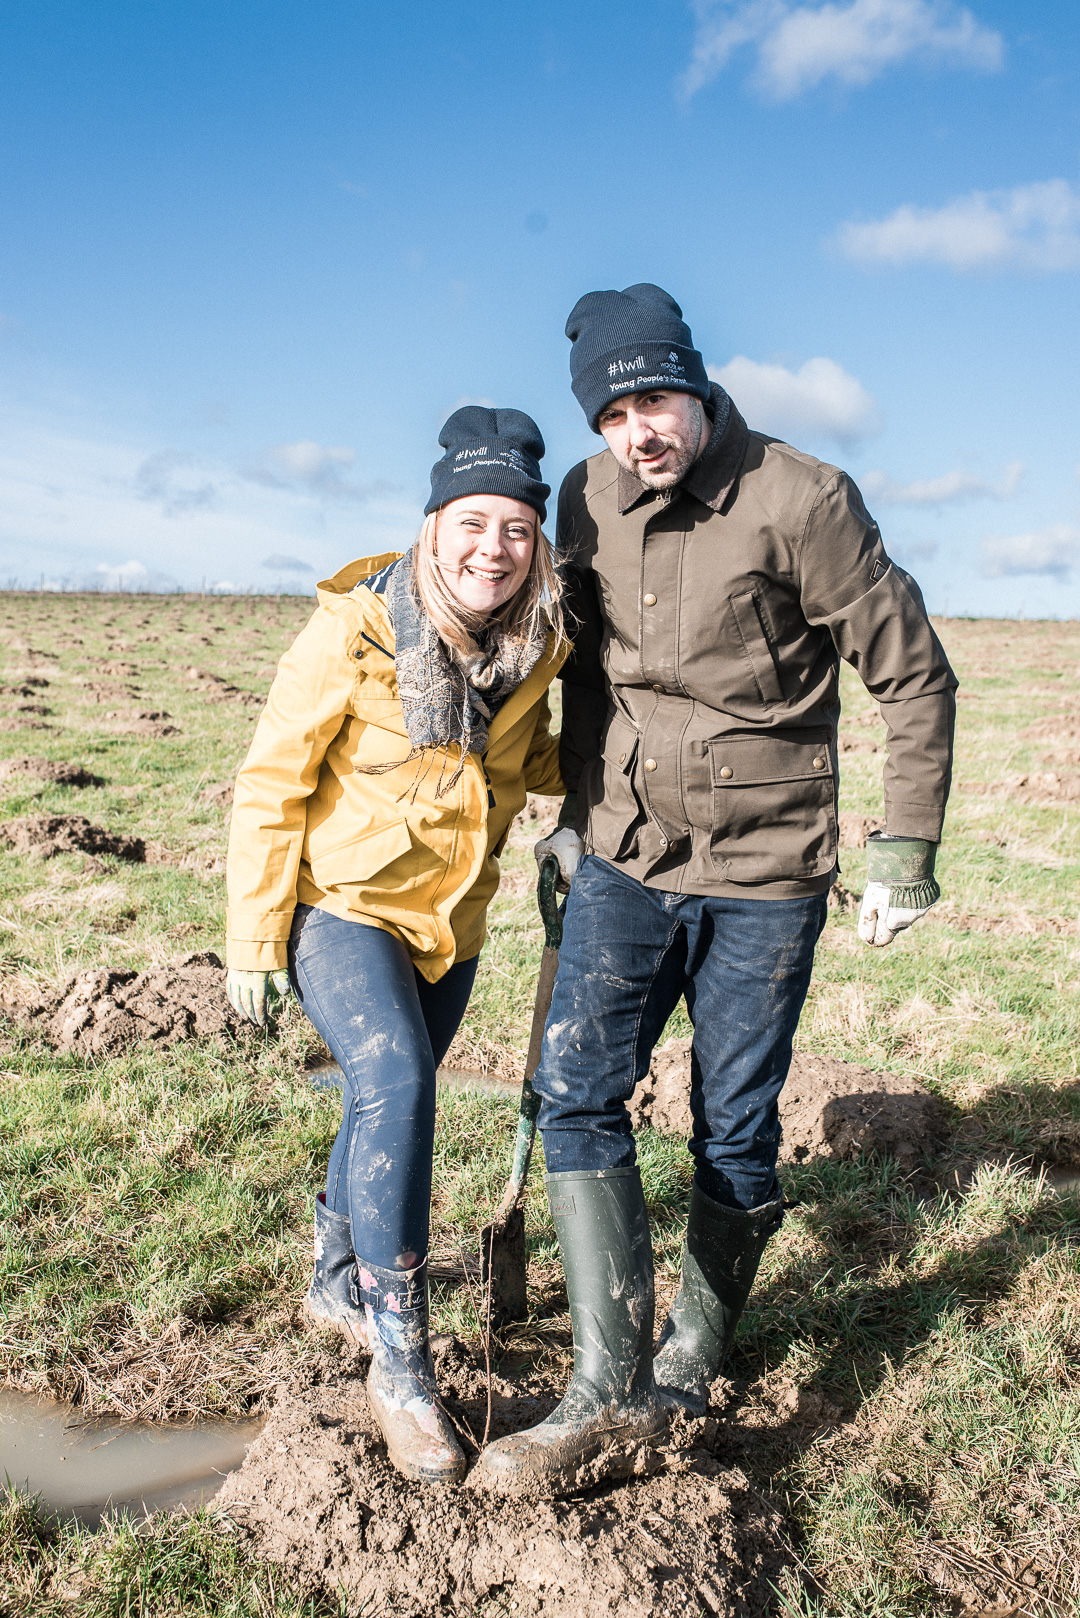 Joules tree planting - Holly made life